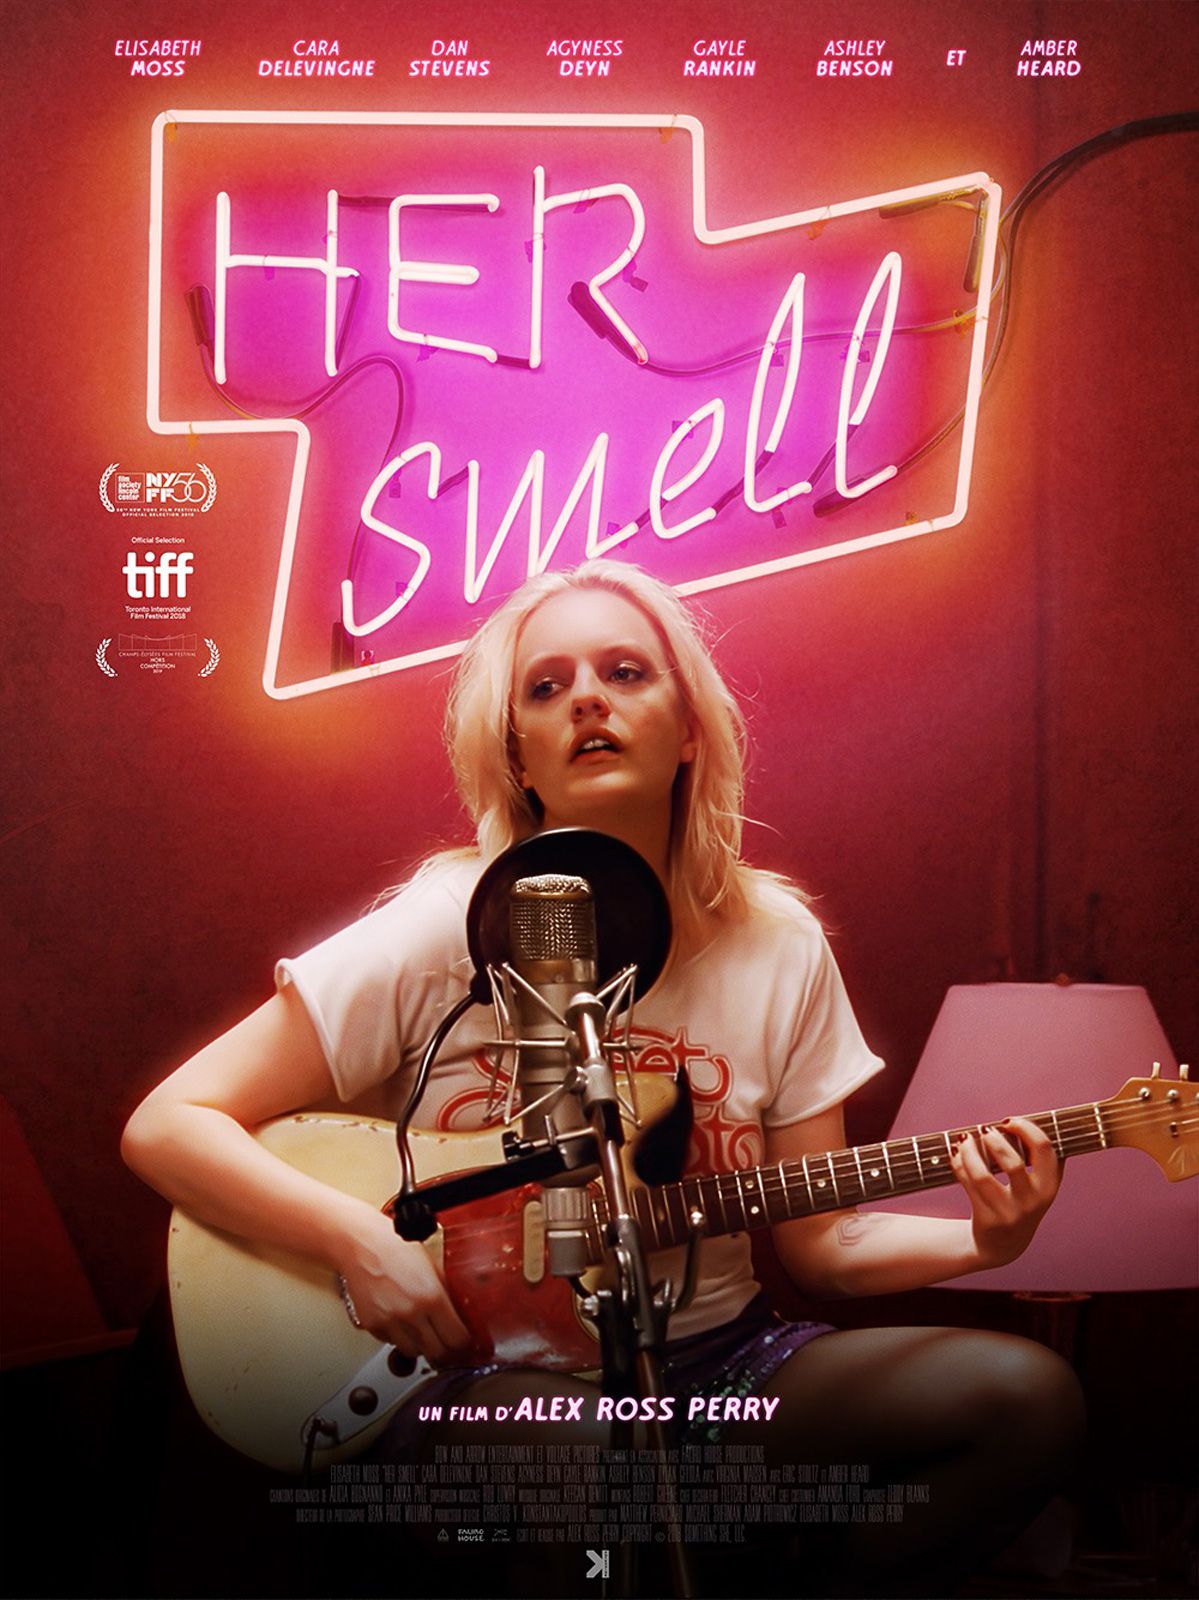 Her Smell - Film (2019) streaming VF gratuit complet